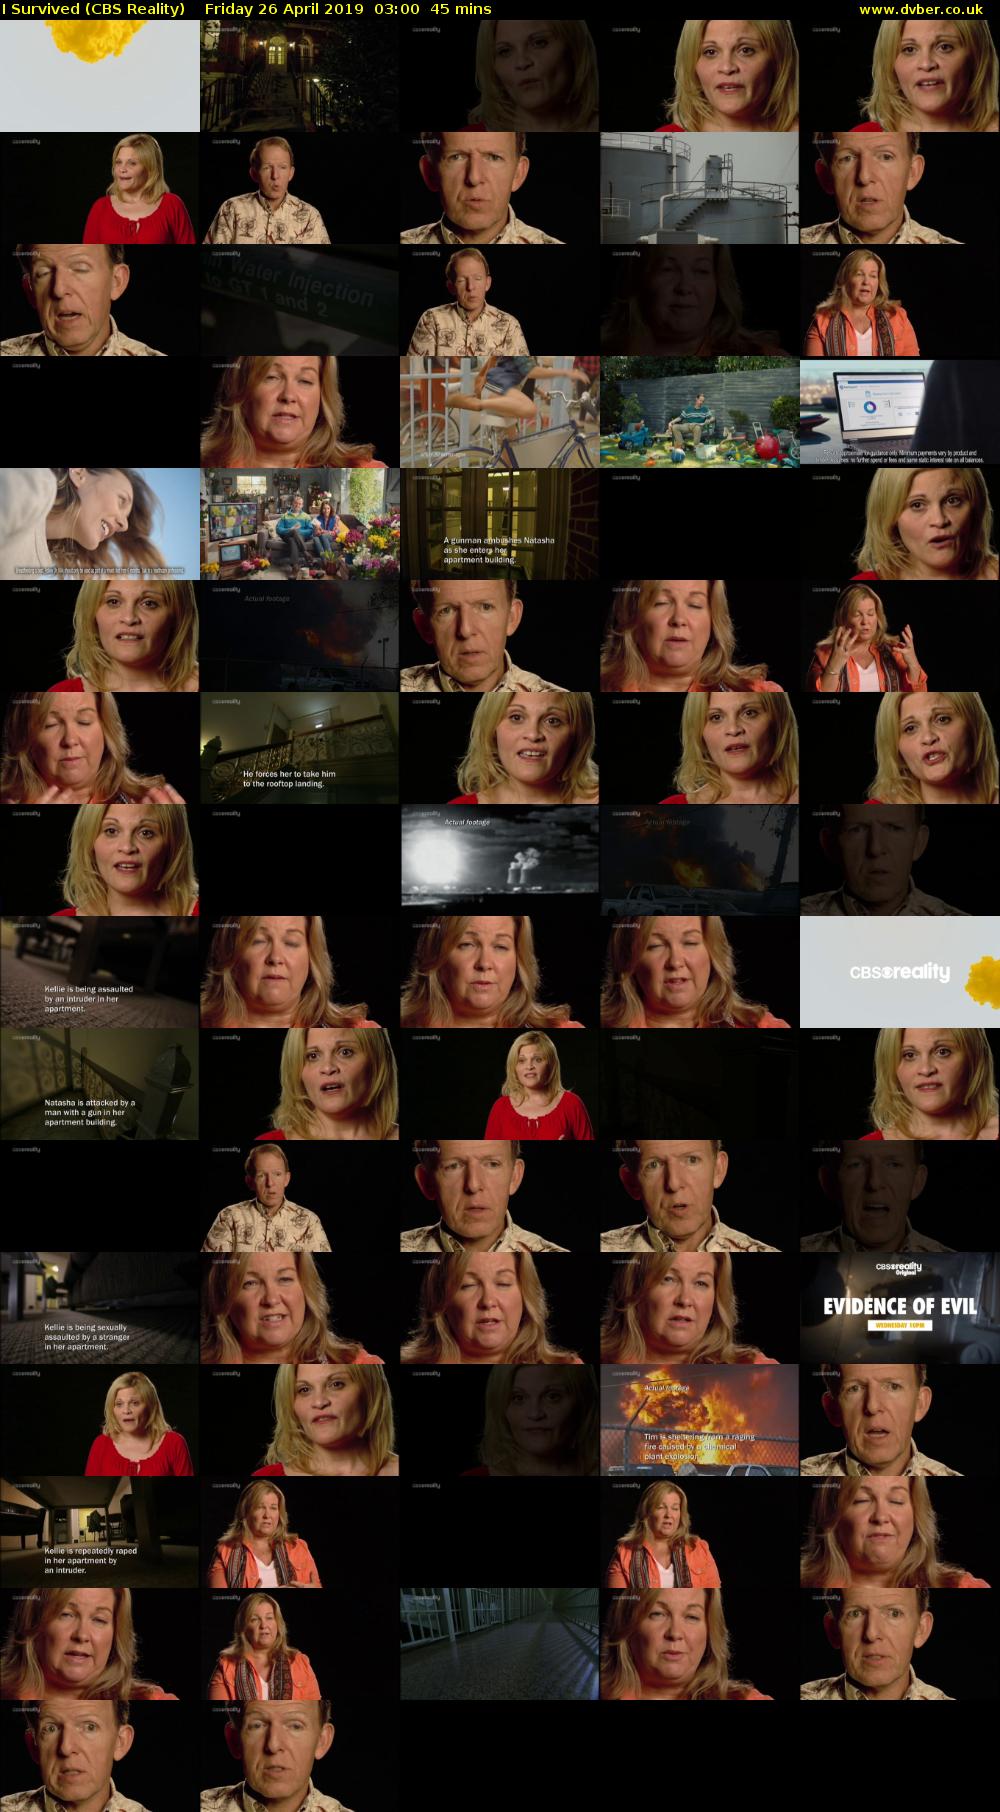 I Survived (CBS Reality) Friday 26 April 2019 03:00 - 03:45